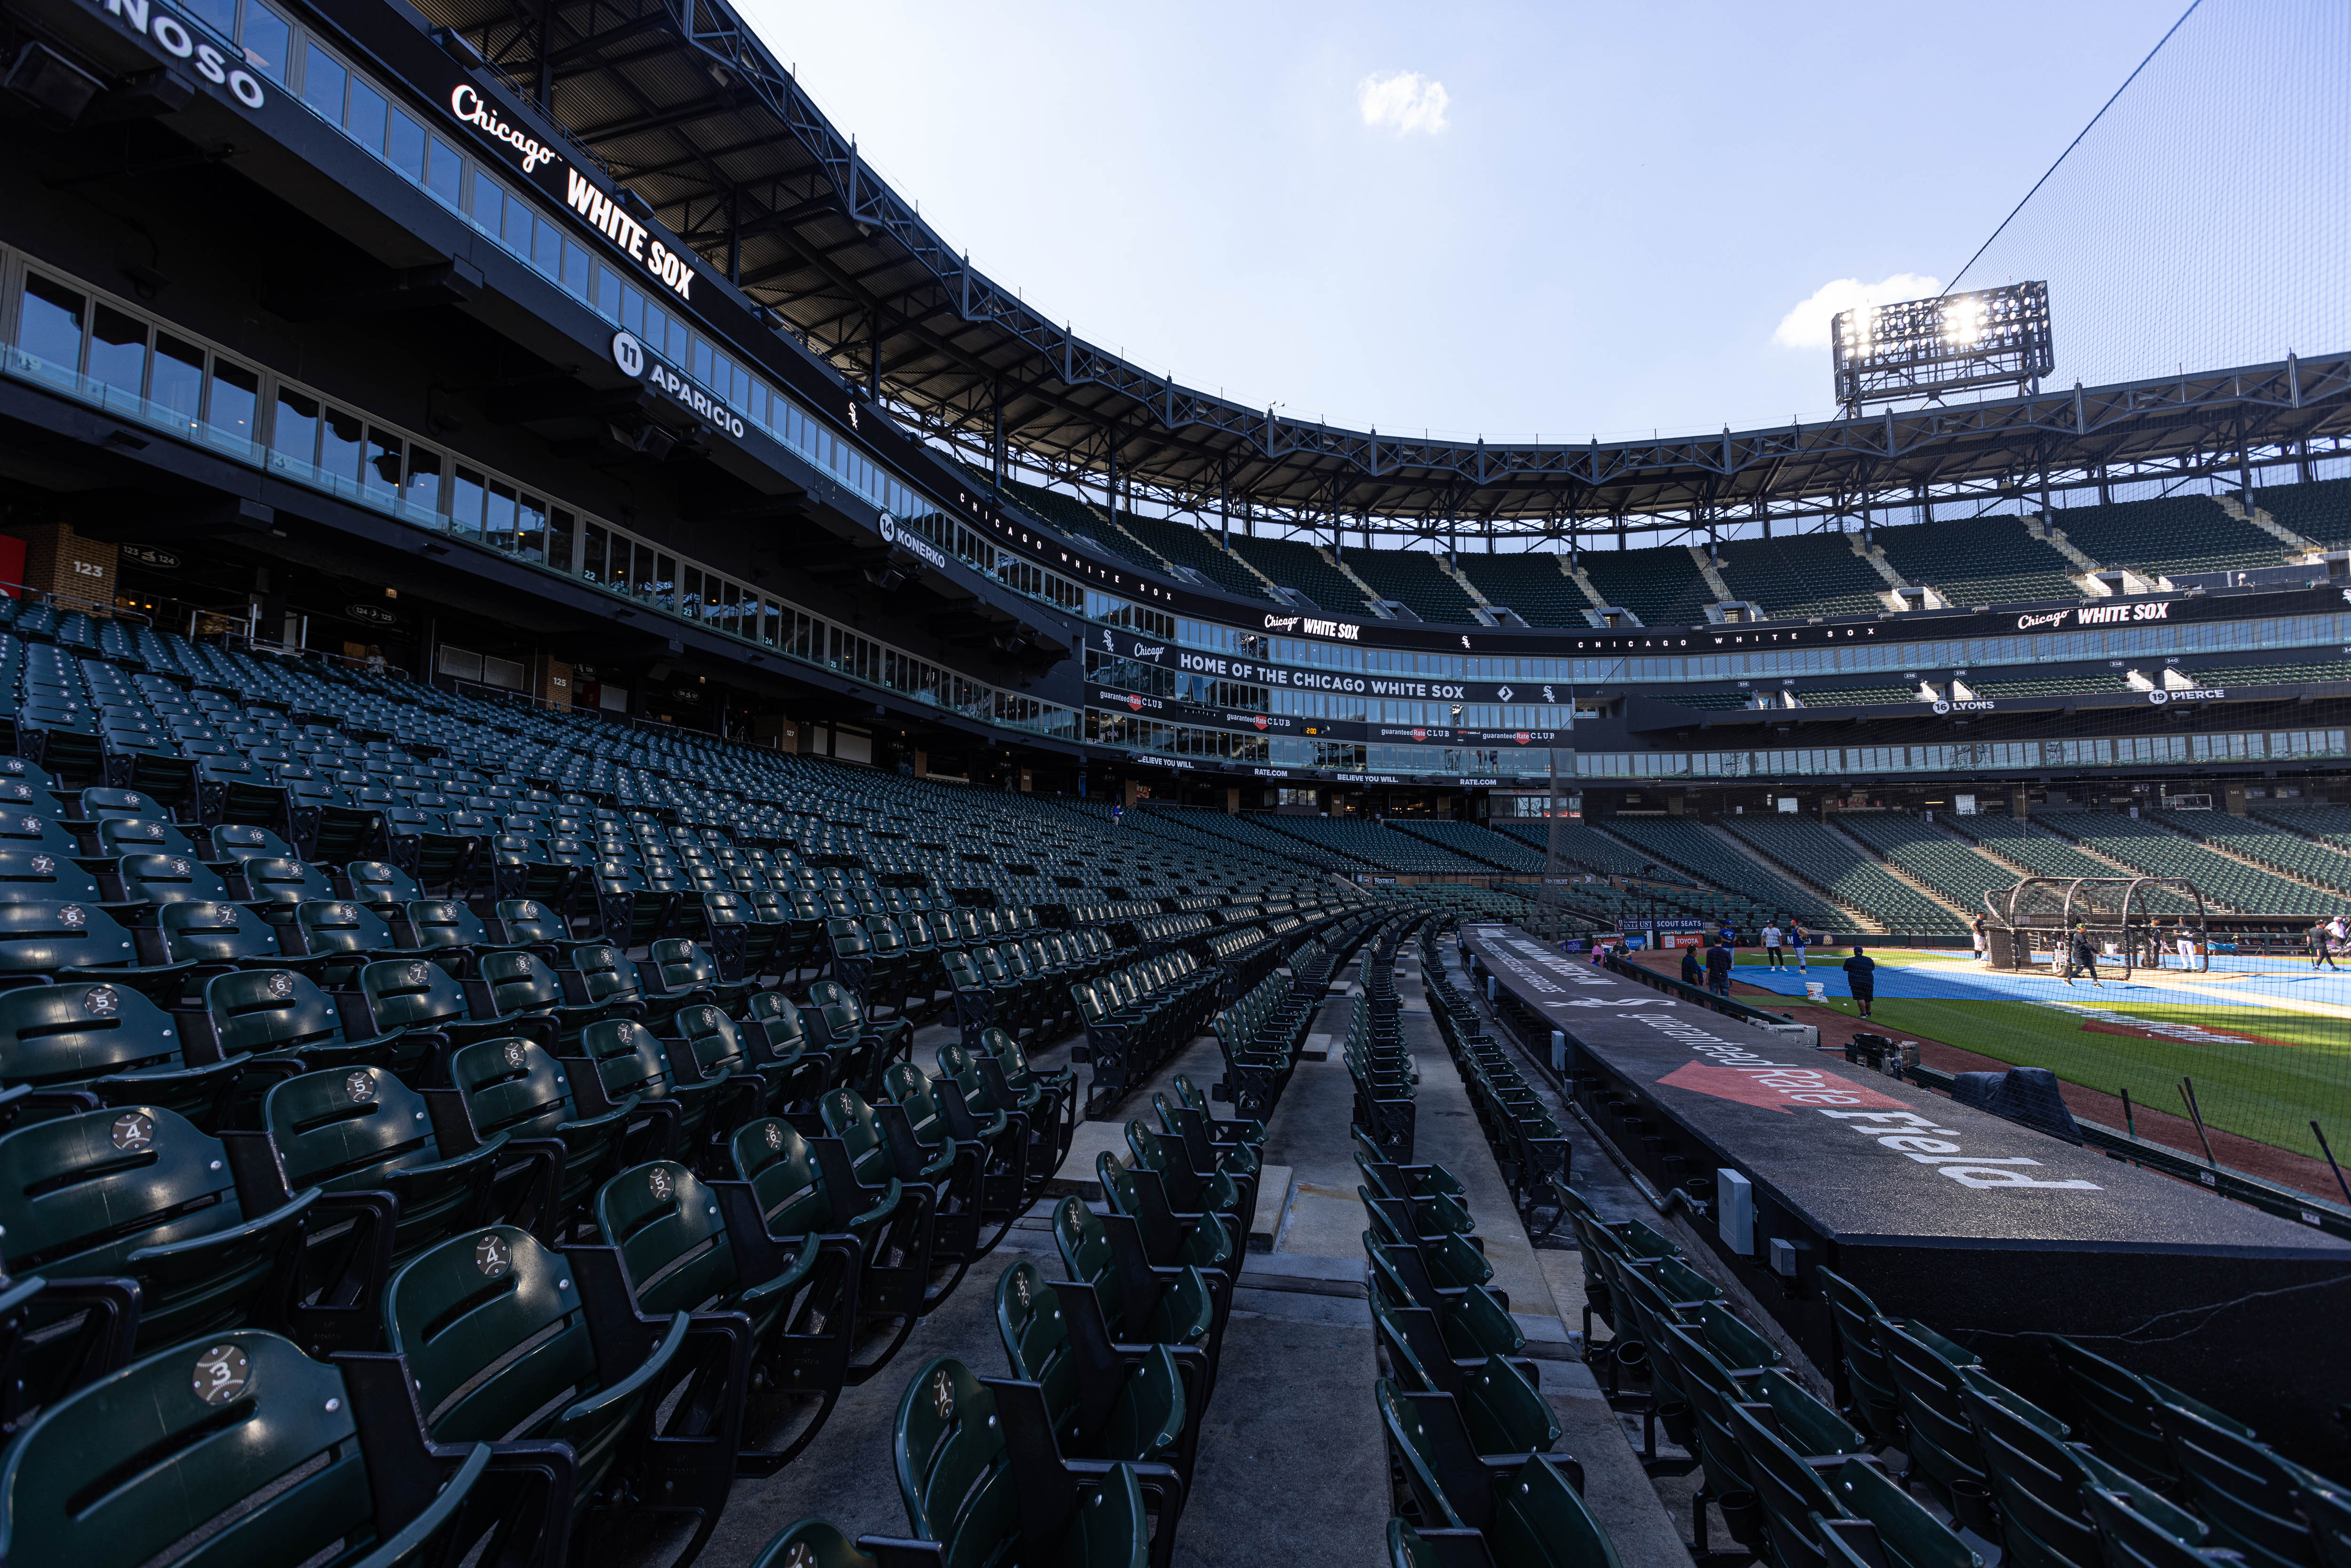 White Sox $1 tickets almost sold out – NBC Sports Chicago